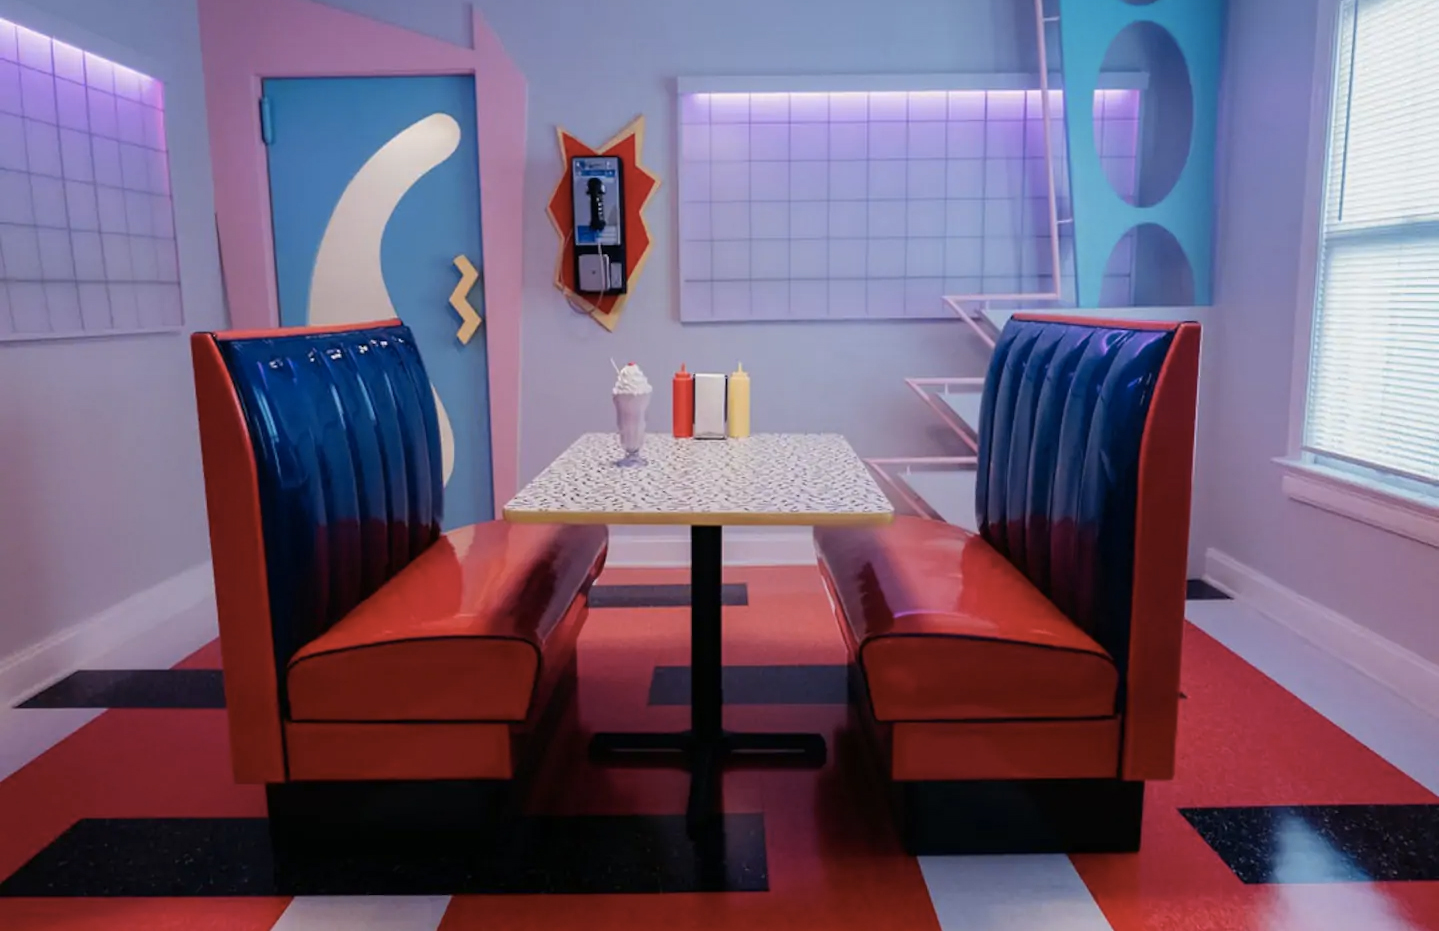 Saved By The Bell comes to life at this 90s-themed Airbnb in Dallas